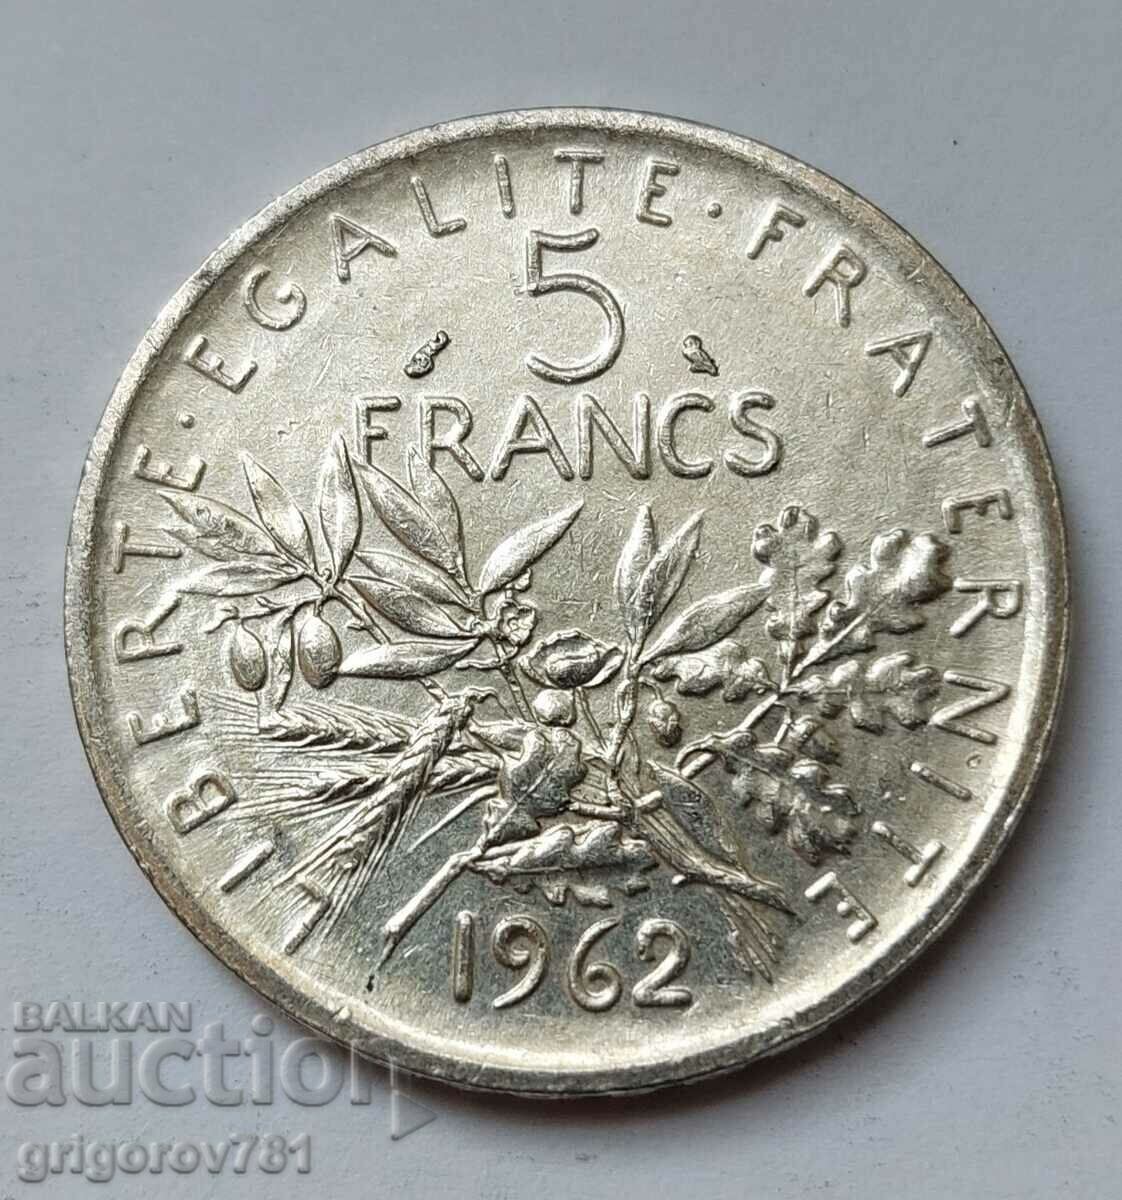 5 Francs Silver France 1962 - Silver Coin #16